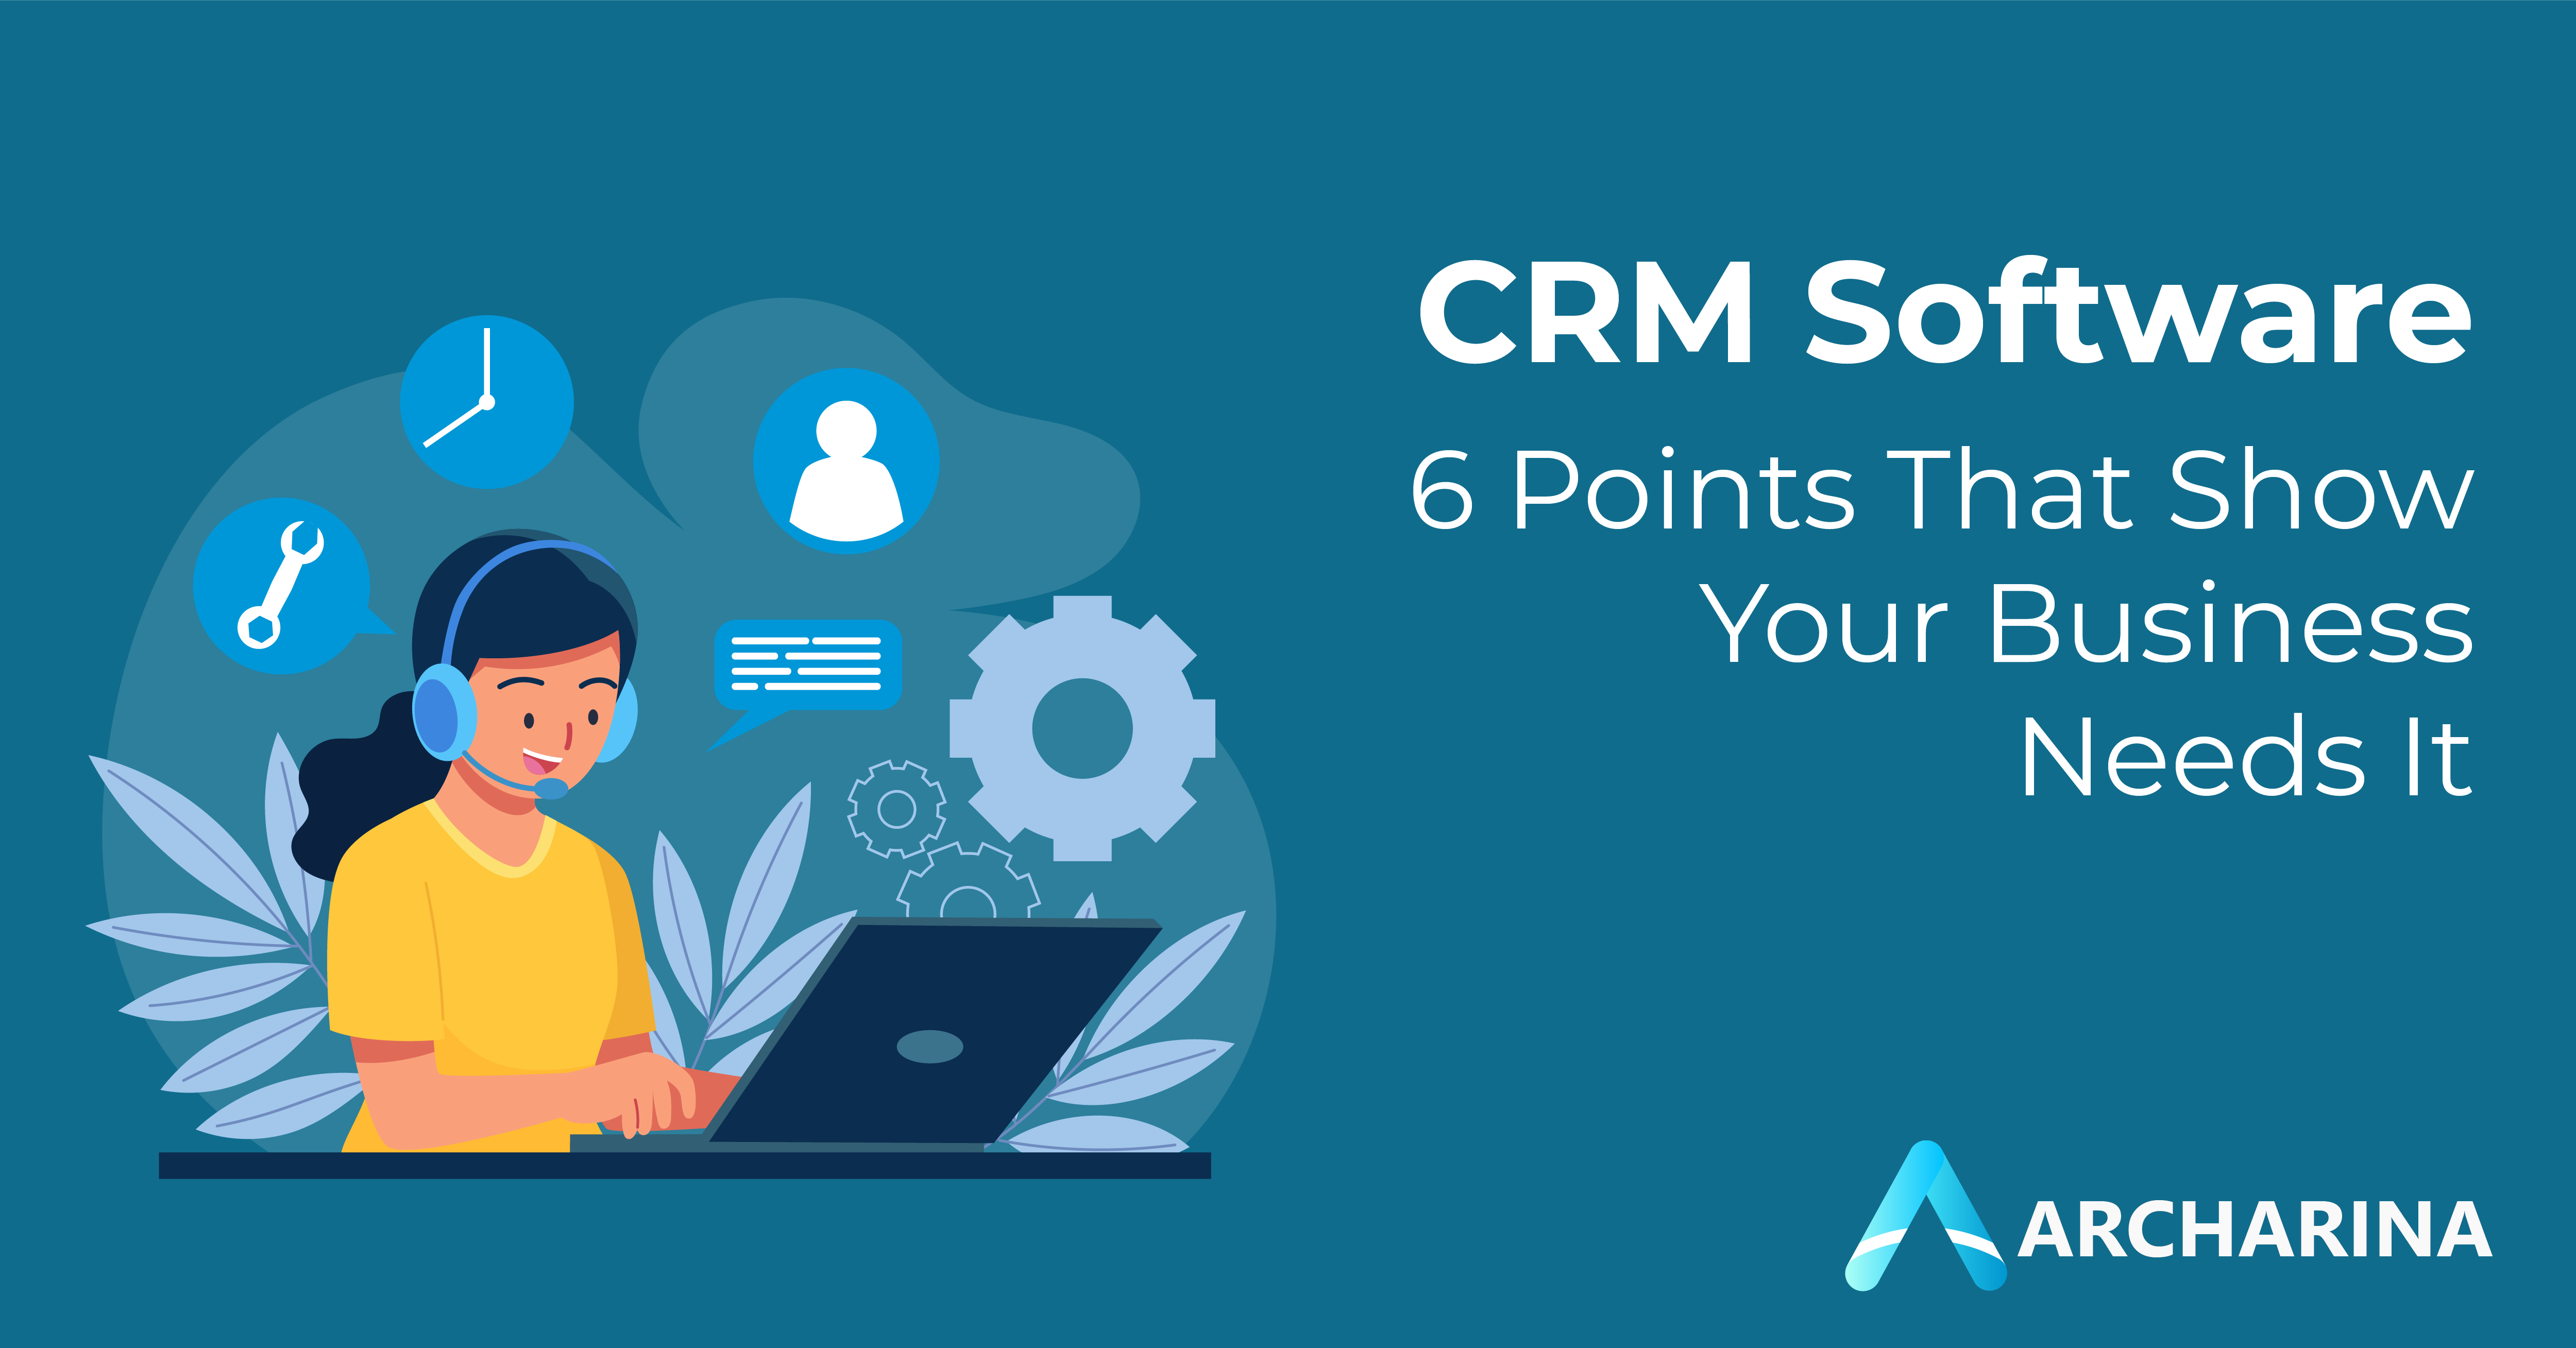 crm-software-6-Points-that-show-your-business-needs-it